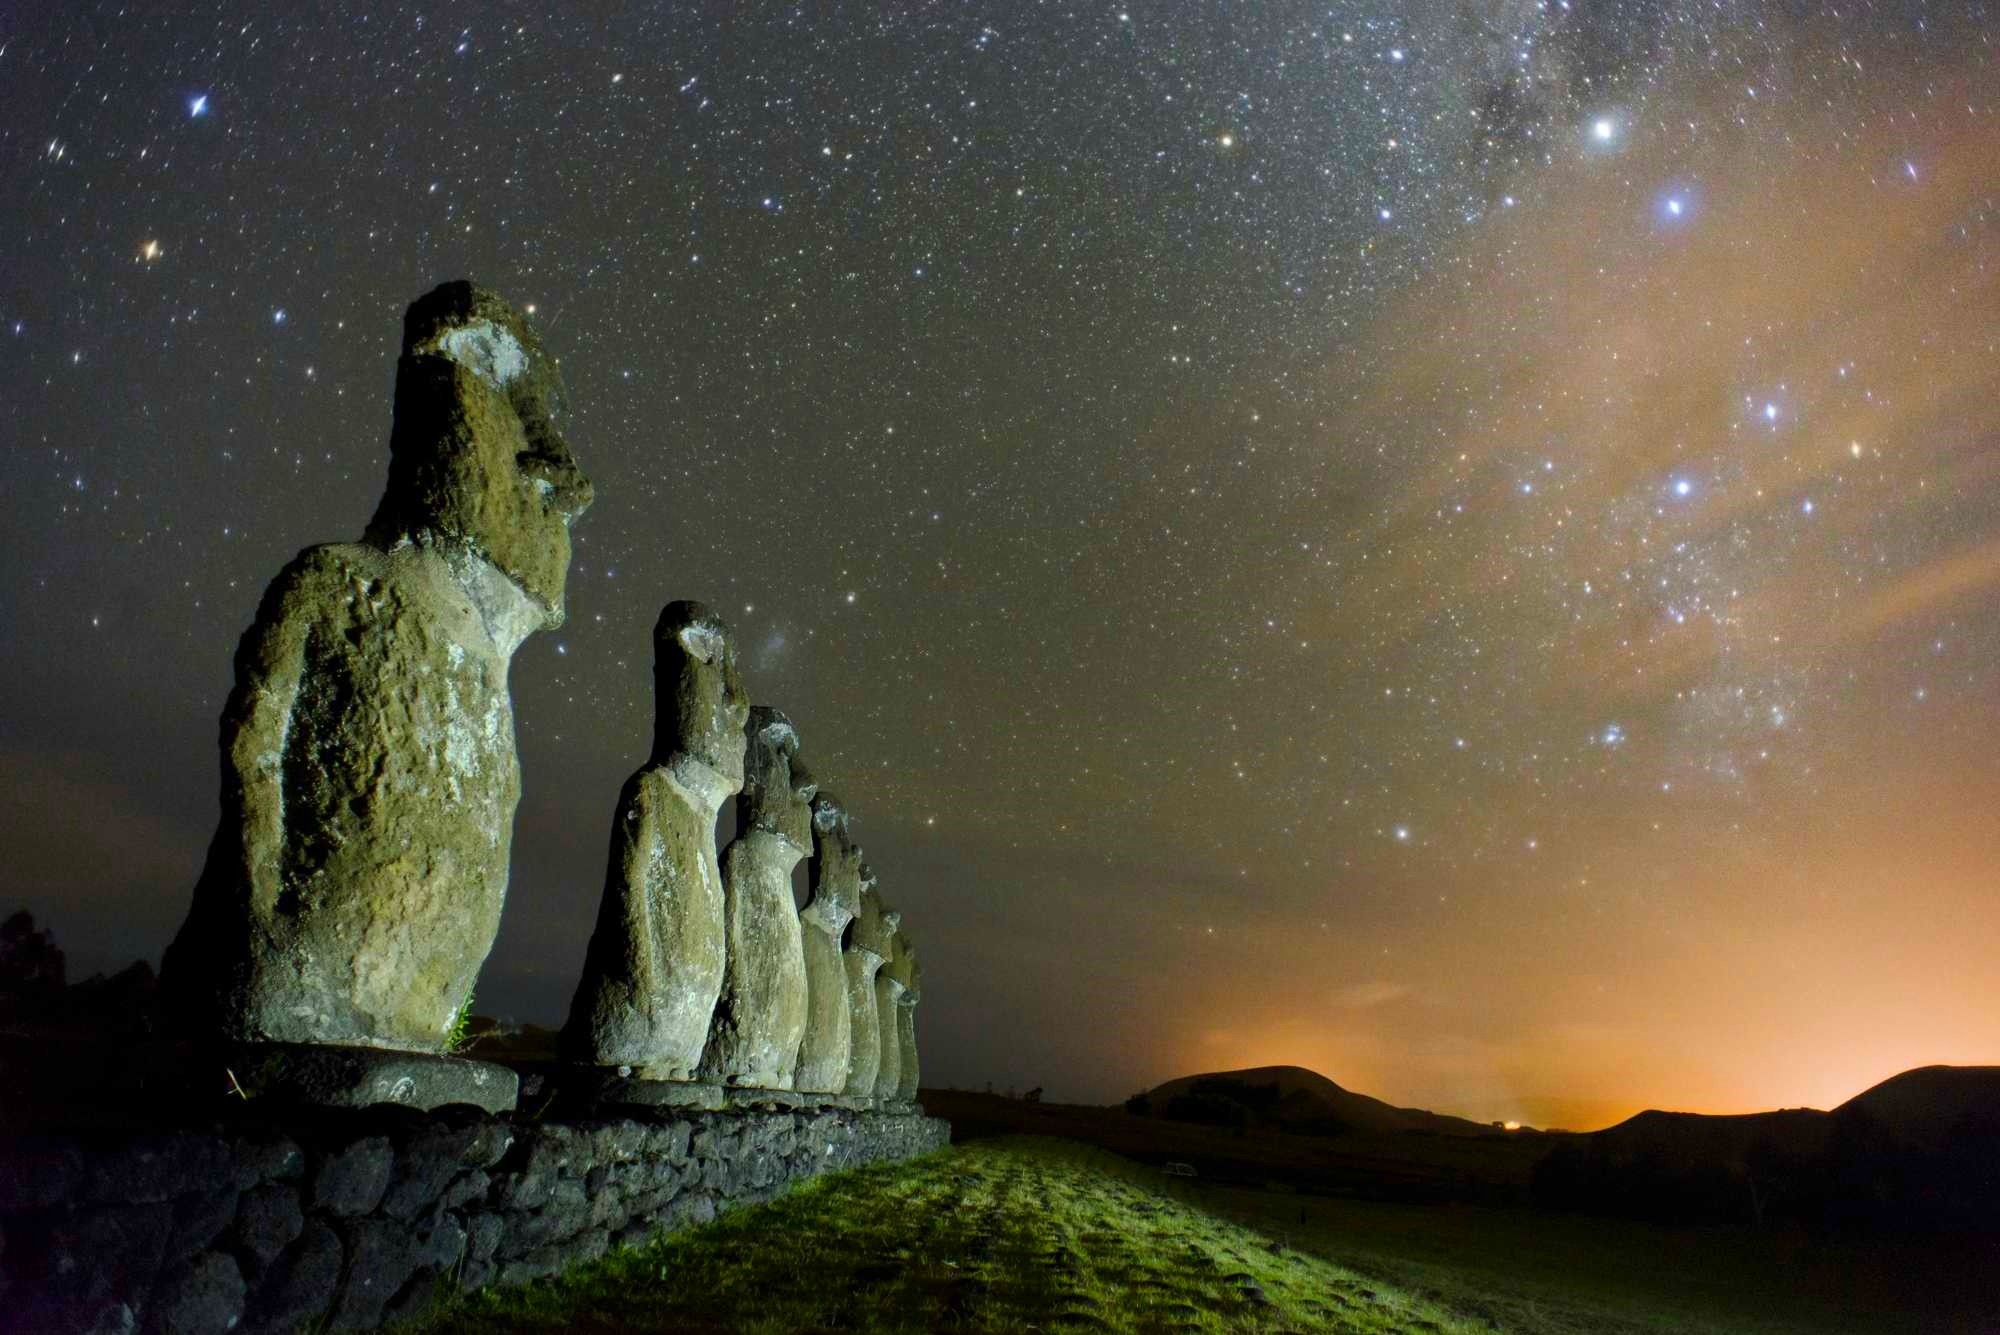 Night Universe Easter Island Monuments Chile Statue Moai Enigma Starry Night Hills Nature Landscape 2000x1335